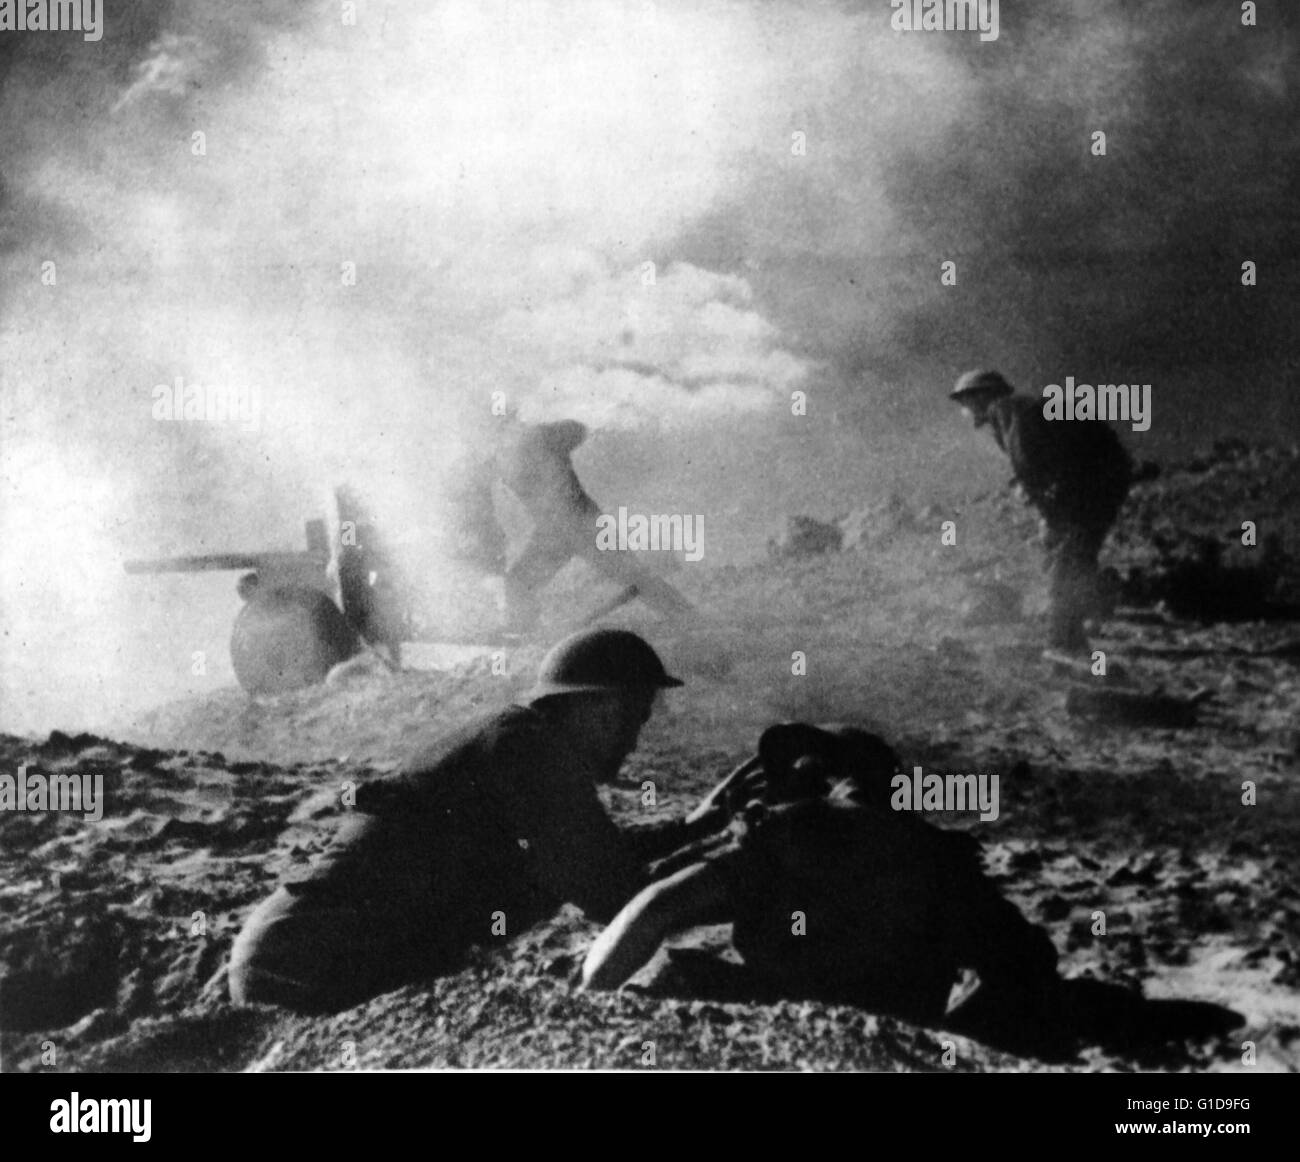 Allied troops in world war II fighting in the Djebel hills in Tunisia campaign 1943. Stock Photo